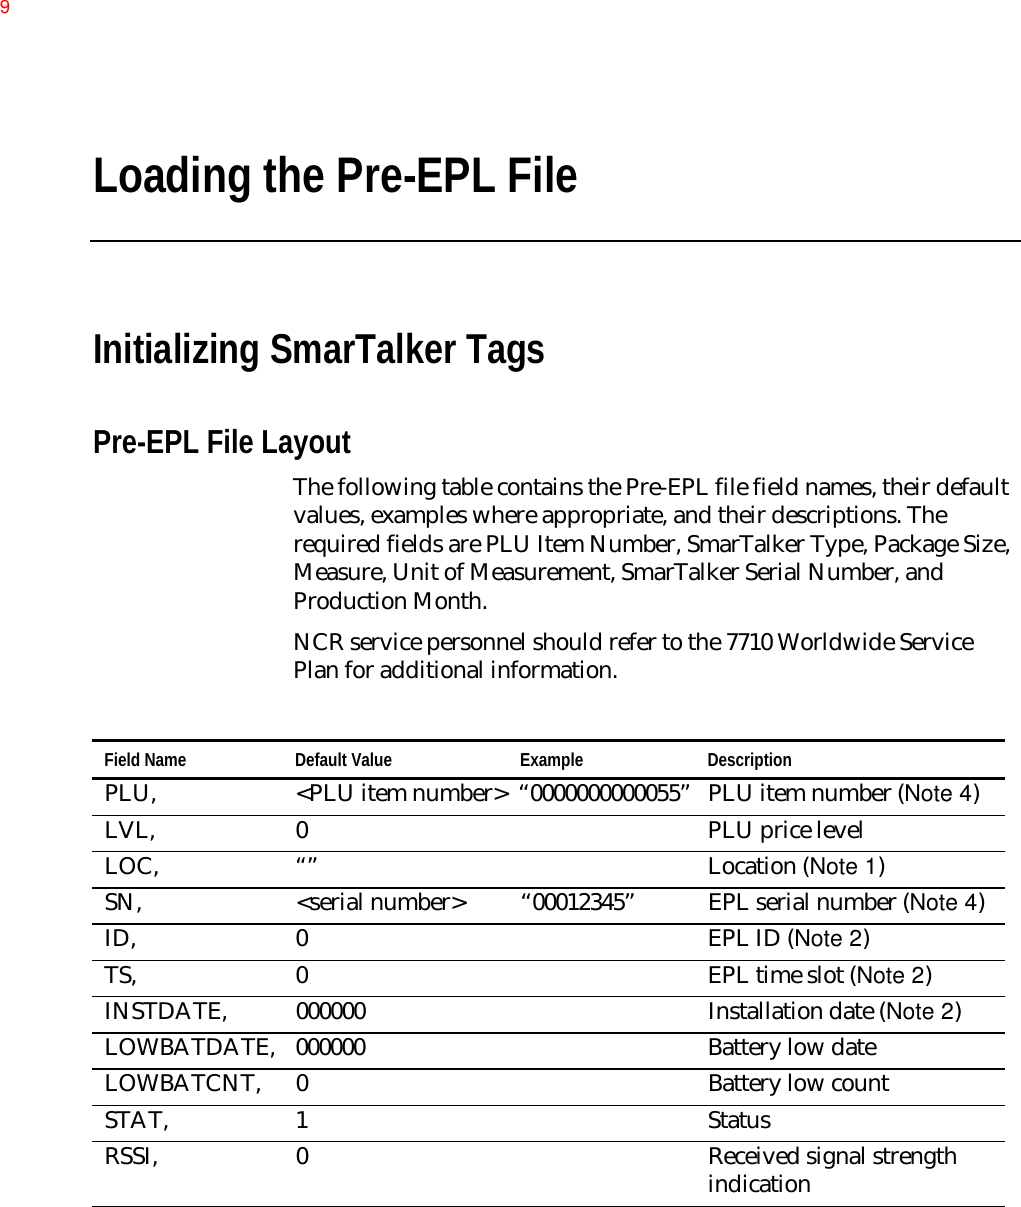 Loading the Pre-EPL FileInitializing SmarTalker TagsPre-EPL File LayoutThe following table contains the Pre-EPL file field names, their defaultvalues, examples where appropriate, and their descriptions. Therequired fields are PLU Item Number, SmarTalker Type, Package Size,Measure, Unit of Measurement, SmarTalker Serial Number, andProduction Month.NCR service personnel should refer to the 7710 Worldwide ServicePlan for additional information.Field Name Default Value Example DescriptionPLU, &lt;PLU item number&gt; “0000000000055” PLU item number (Note 4)LVL, 0 PLU price levelLOC, “” Location (Note 1)SN, &lt;serial number&gt; “00012345” EPL serial number (Note 4)ID, 0 EPL ID (Note 2)TS, 0 EPL time slot (Note 2)INSTDATE, 000000 Installation date (Note 2)LOWBATDATE, 000000 Battery low dateLOWBATCNT, 0 Battery low countSTAT, 1 StatusRSSI, 0 Received signal strengthindication9